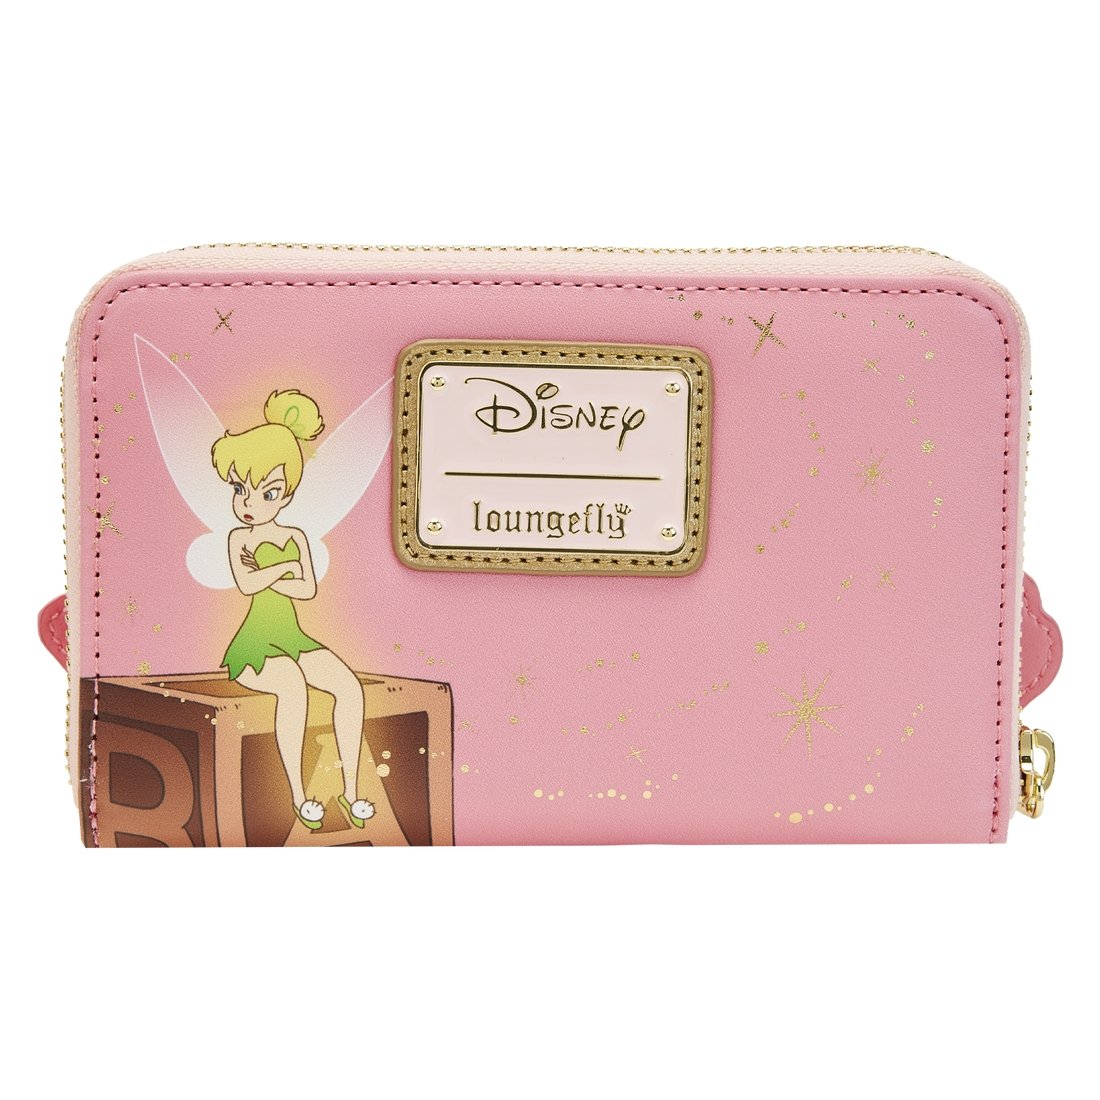 Peter Pan You Can Fly 70th Anniversary Wallet - Rockamilly-Bags & Purses-Vintage